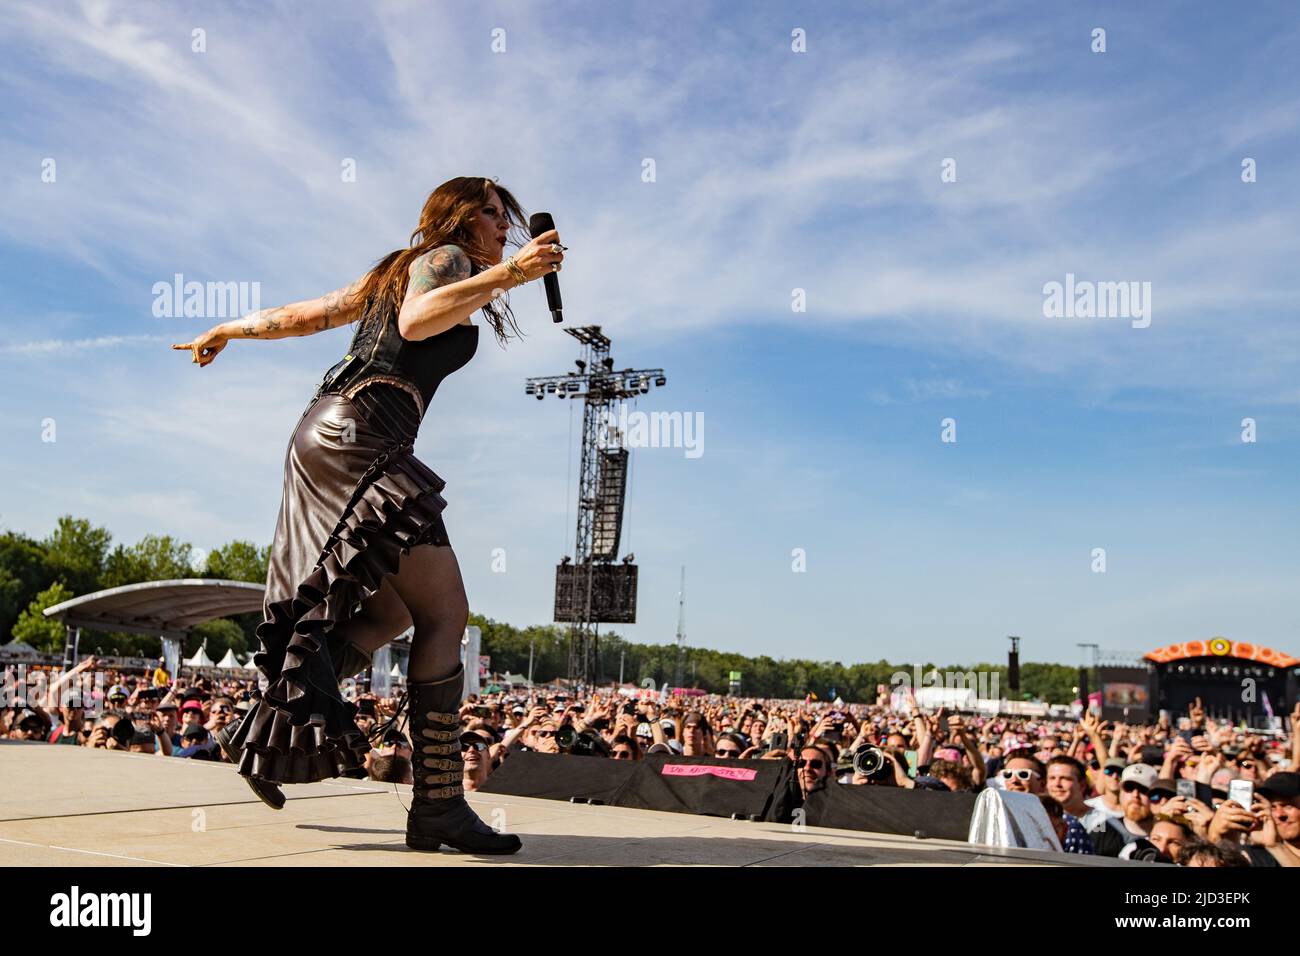 Landgraaf, Belgium. 17th June, 2022. 2022-06-17 17:46:20 LANDGRAAF - The Icelandic rock band Nightwish with lead singer Floor Jansen will perform during the first day of the Pinkpop music festival. ANP PAUL BERGEN netherlands out - belgium out Credit: ANP/Alamy Live News Stock Photo